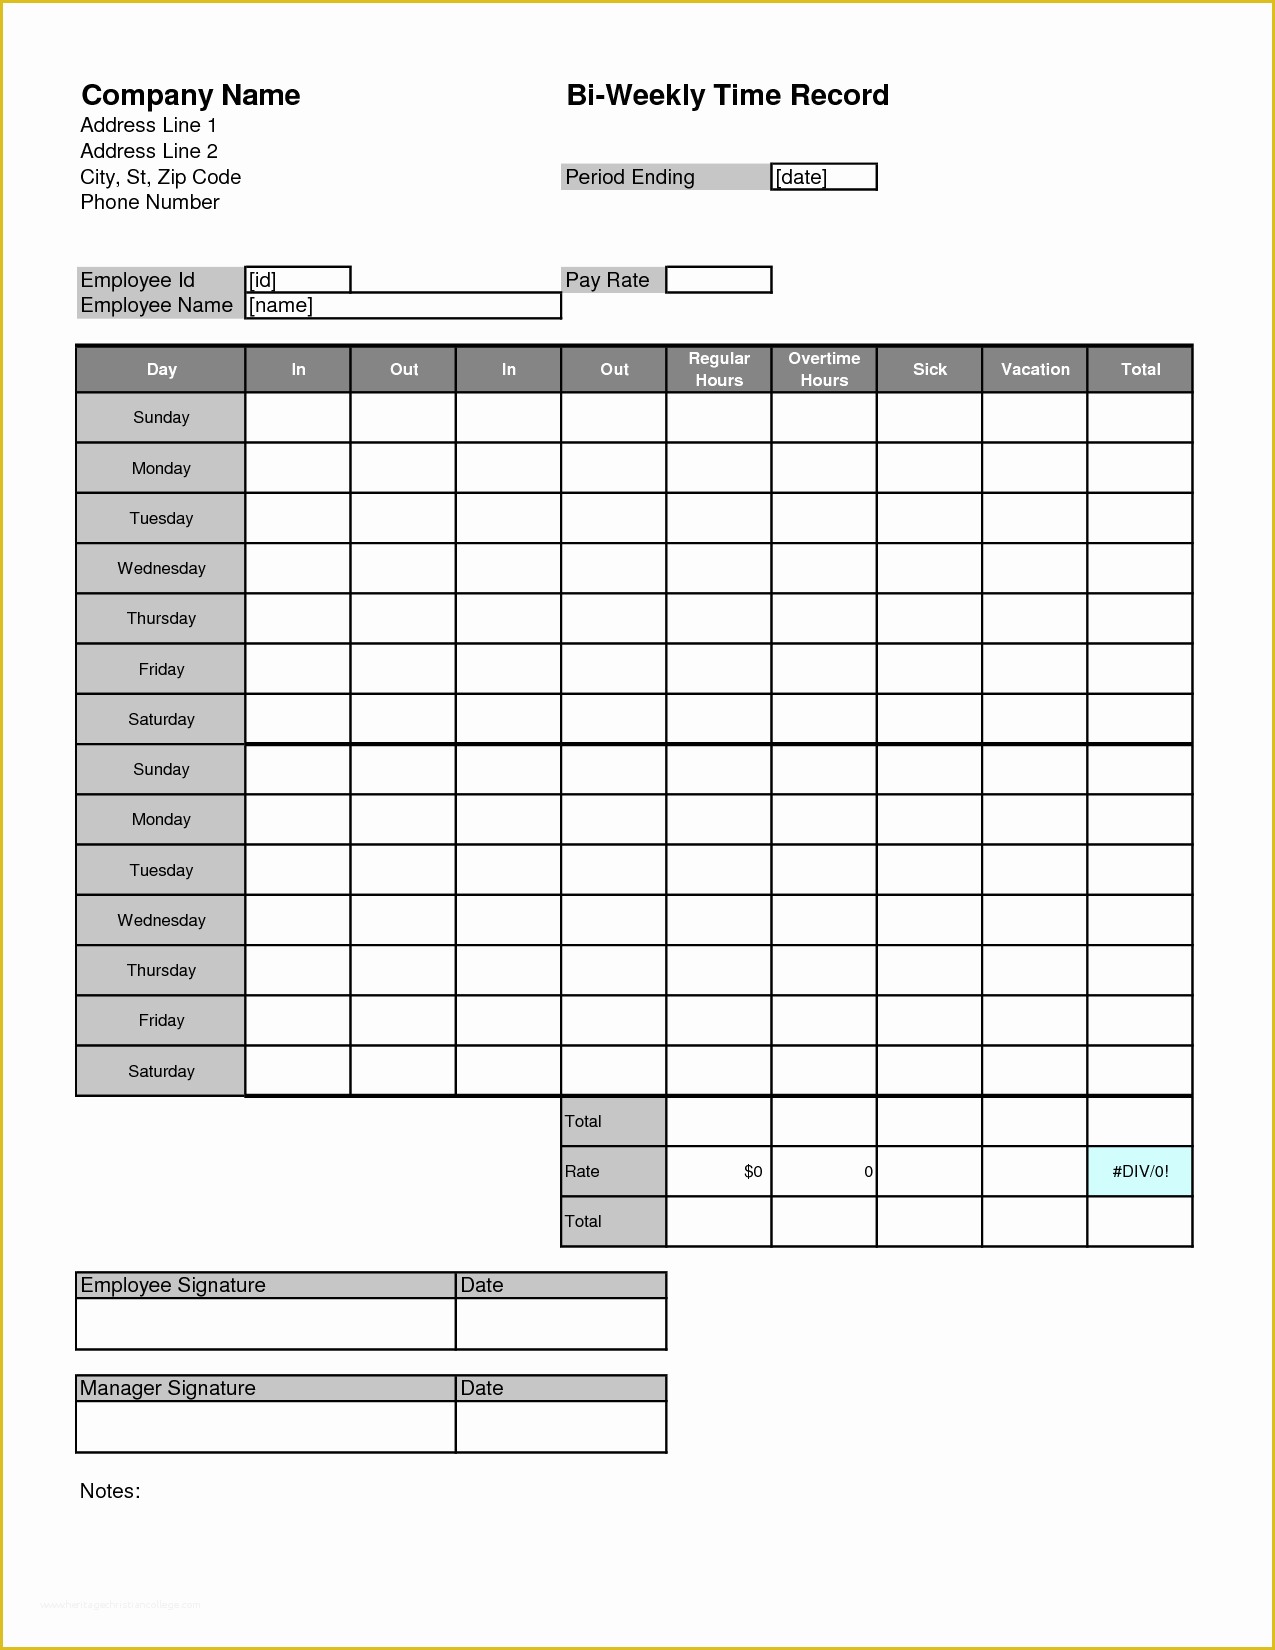 Time Card Spreadsheet Template Free Of for Time Card Template Timesheets